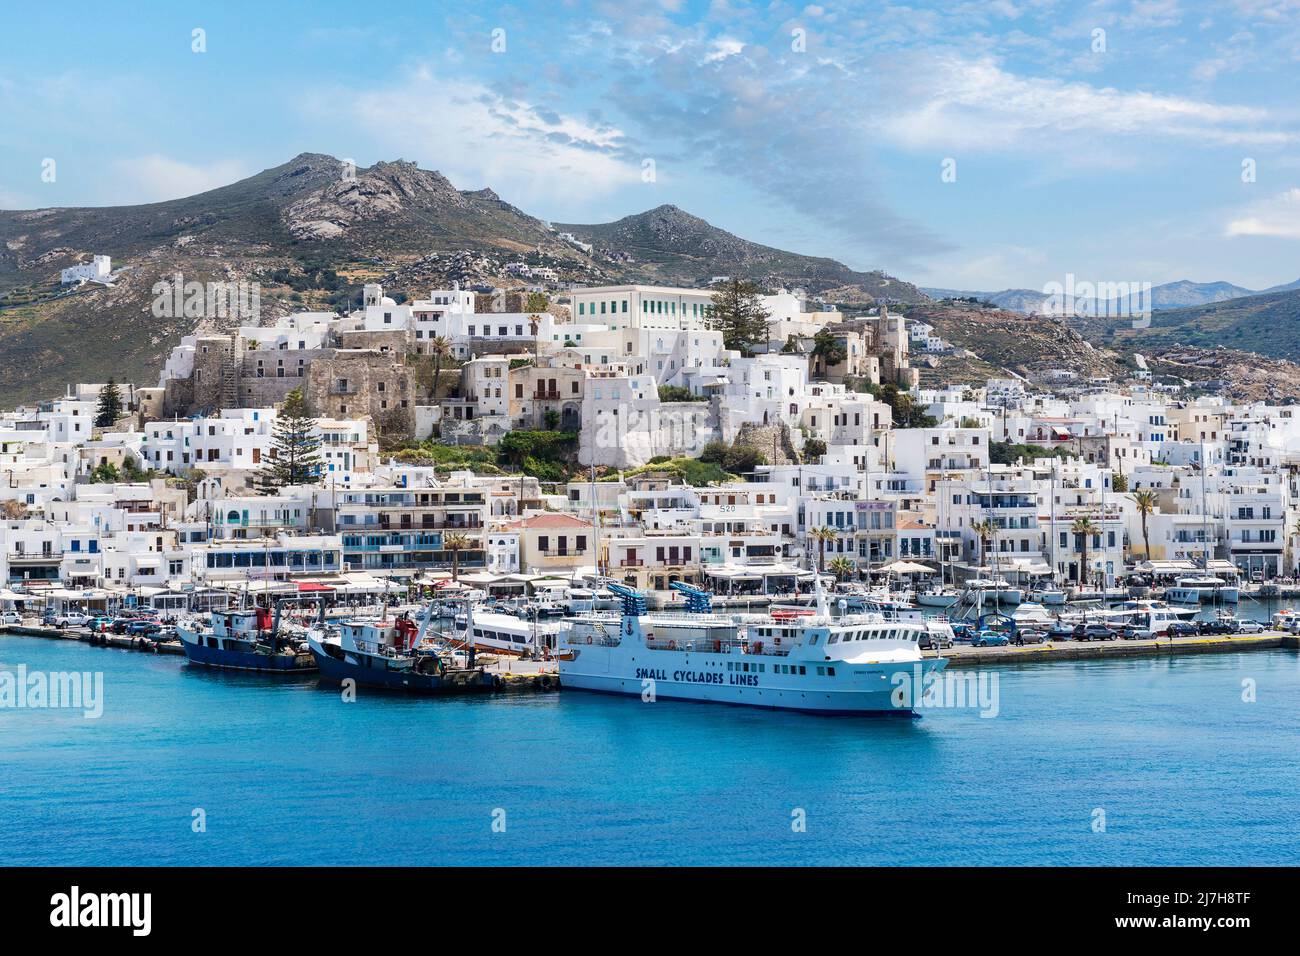 Port of Naxos island, in Cyclades, Greece, Europe. This is Chora, the capital town of Naxos, and the ship seen is the legendary .Skopelitis Stock Photo